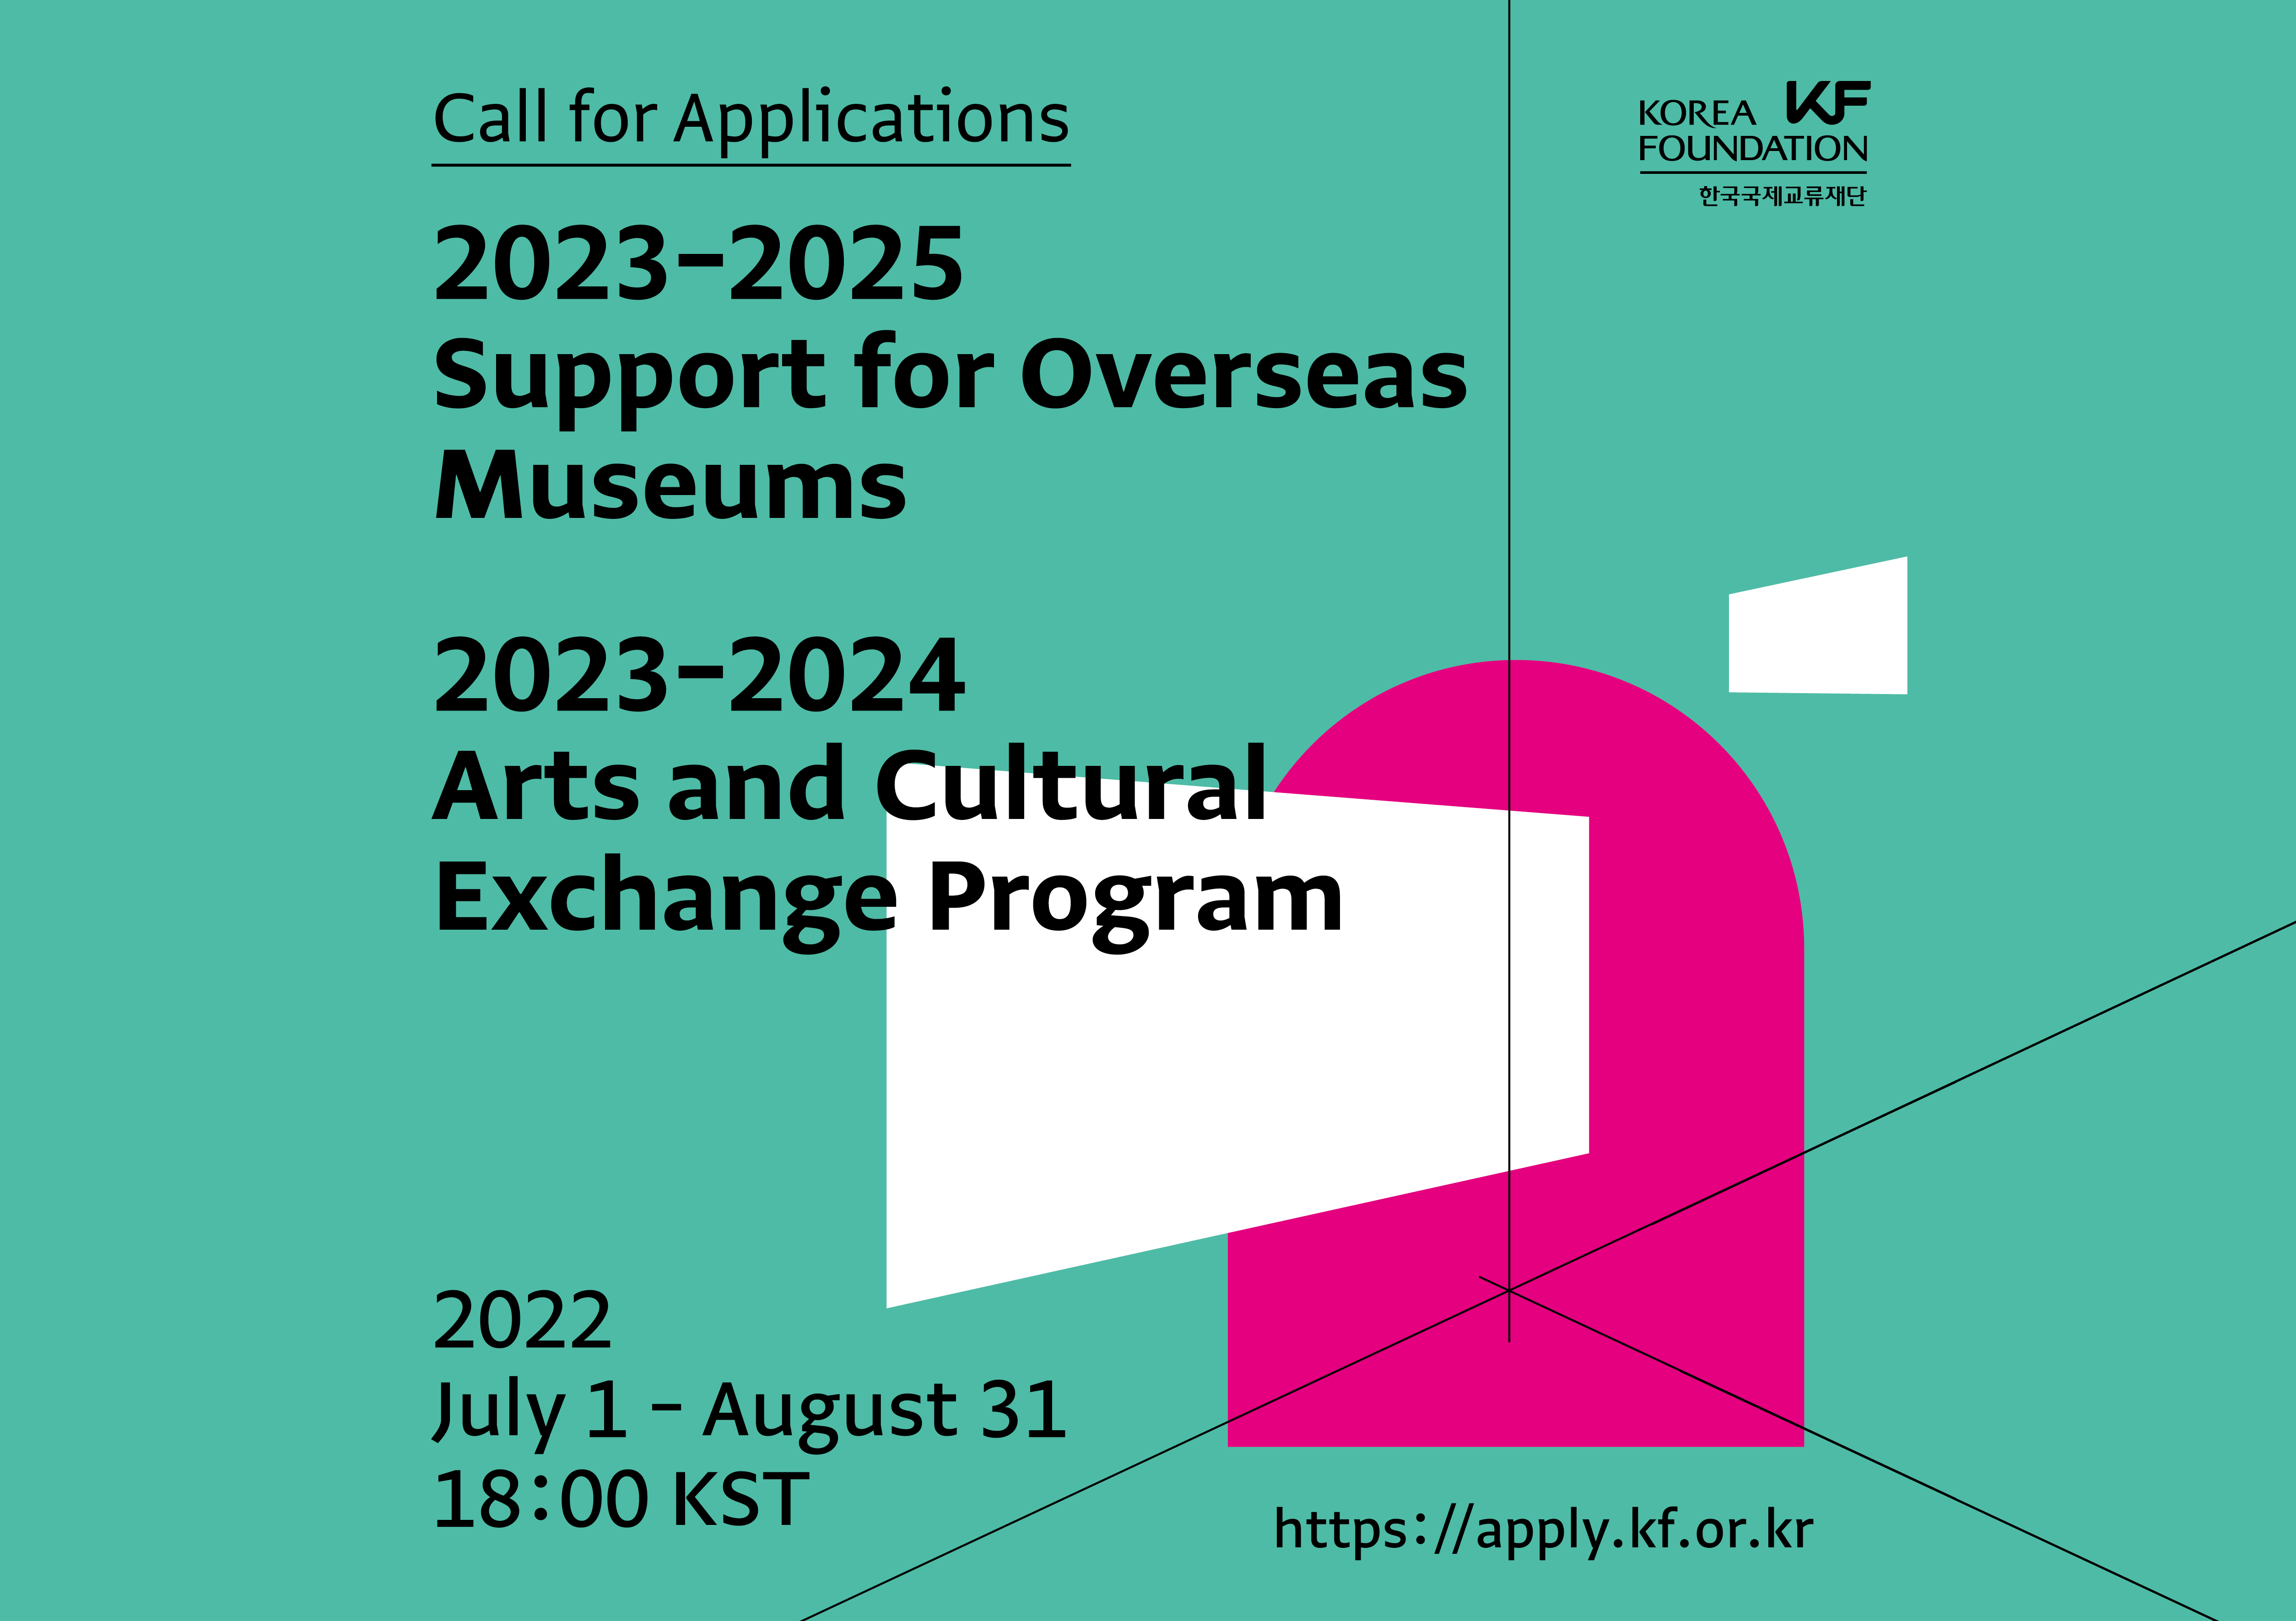 2023-2025 Support for Overseas Museums and 2023-2024 Arts and Cultural Exchange Program